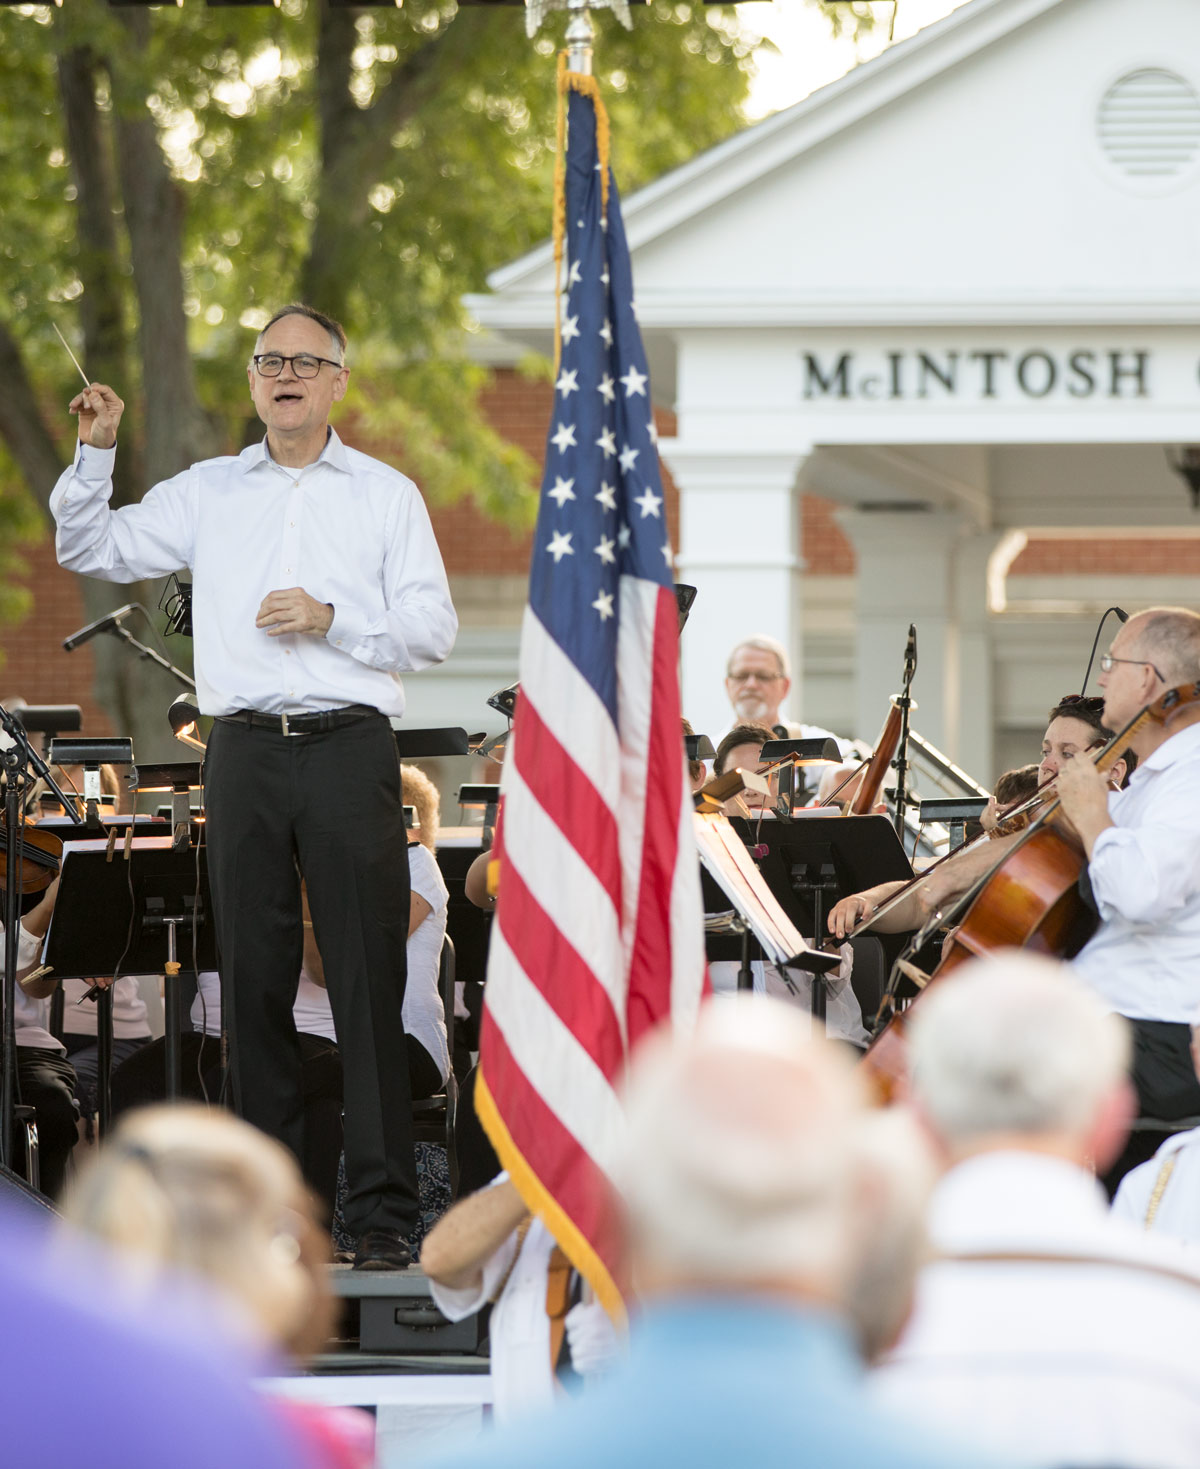 The Lima Symphony Orchestra played a “Patriotic Pops” concert outside of McIntosh Center on the campus of «Ӱҵ. 